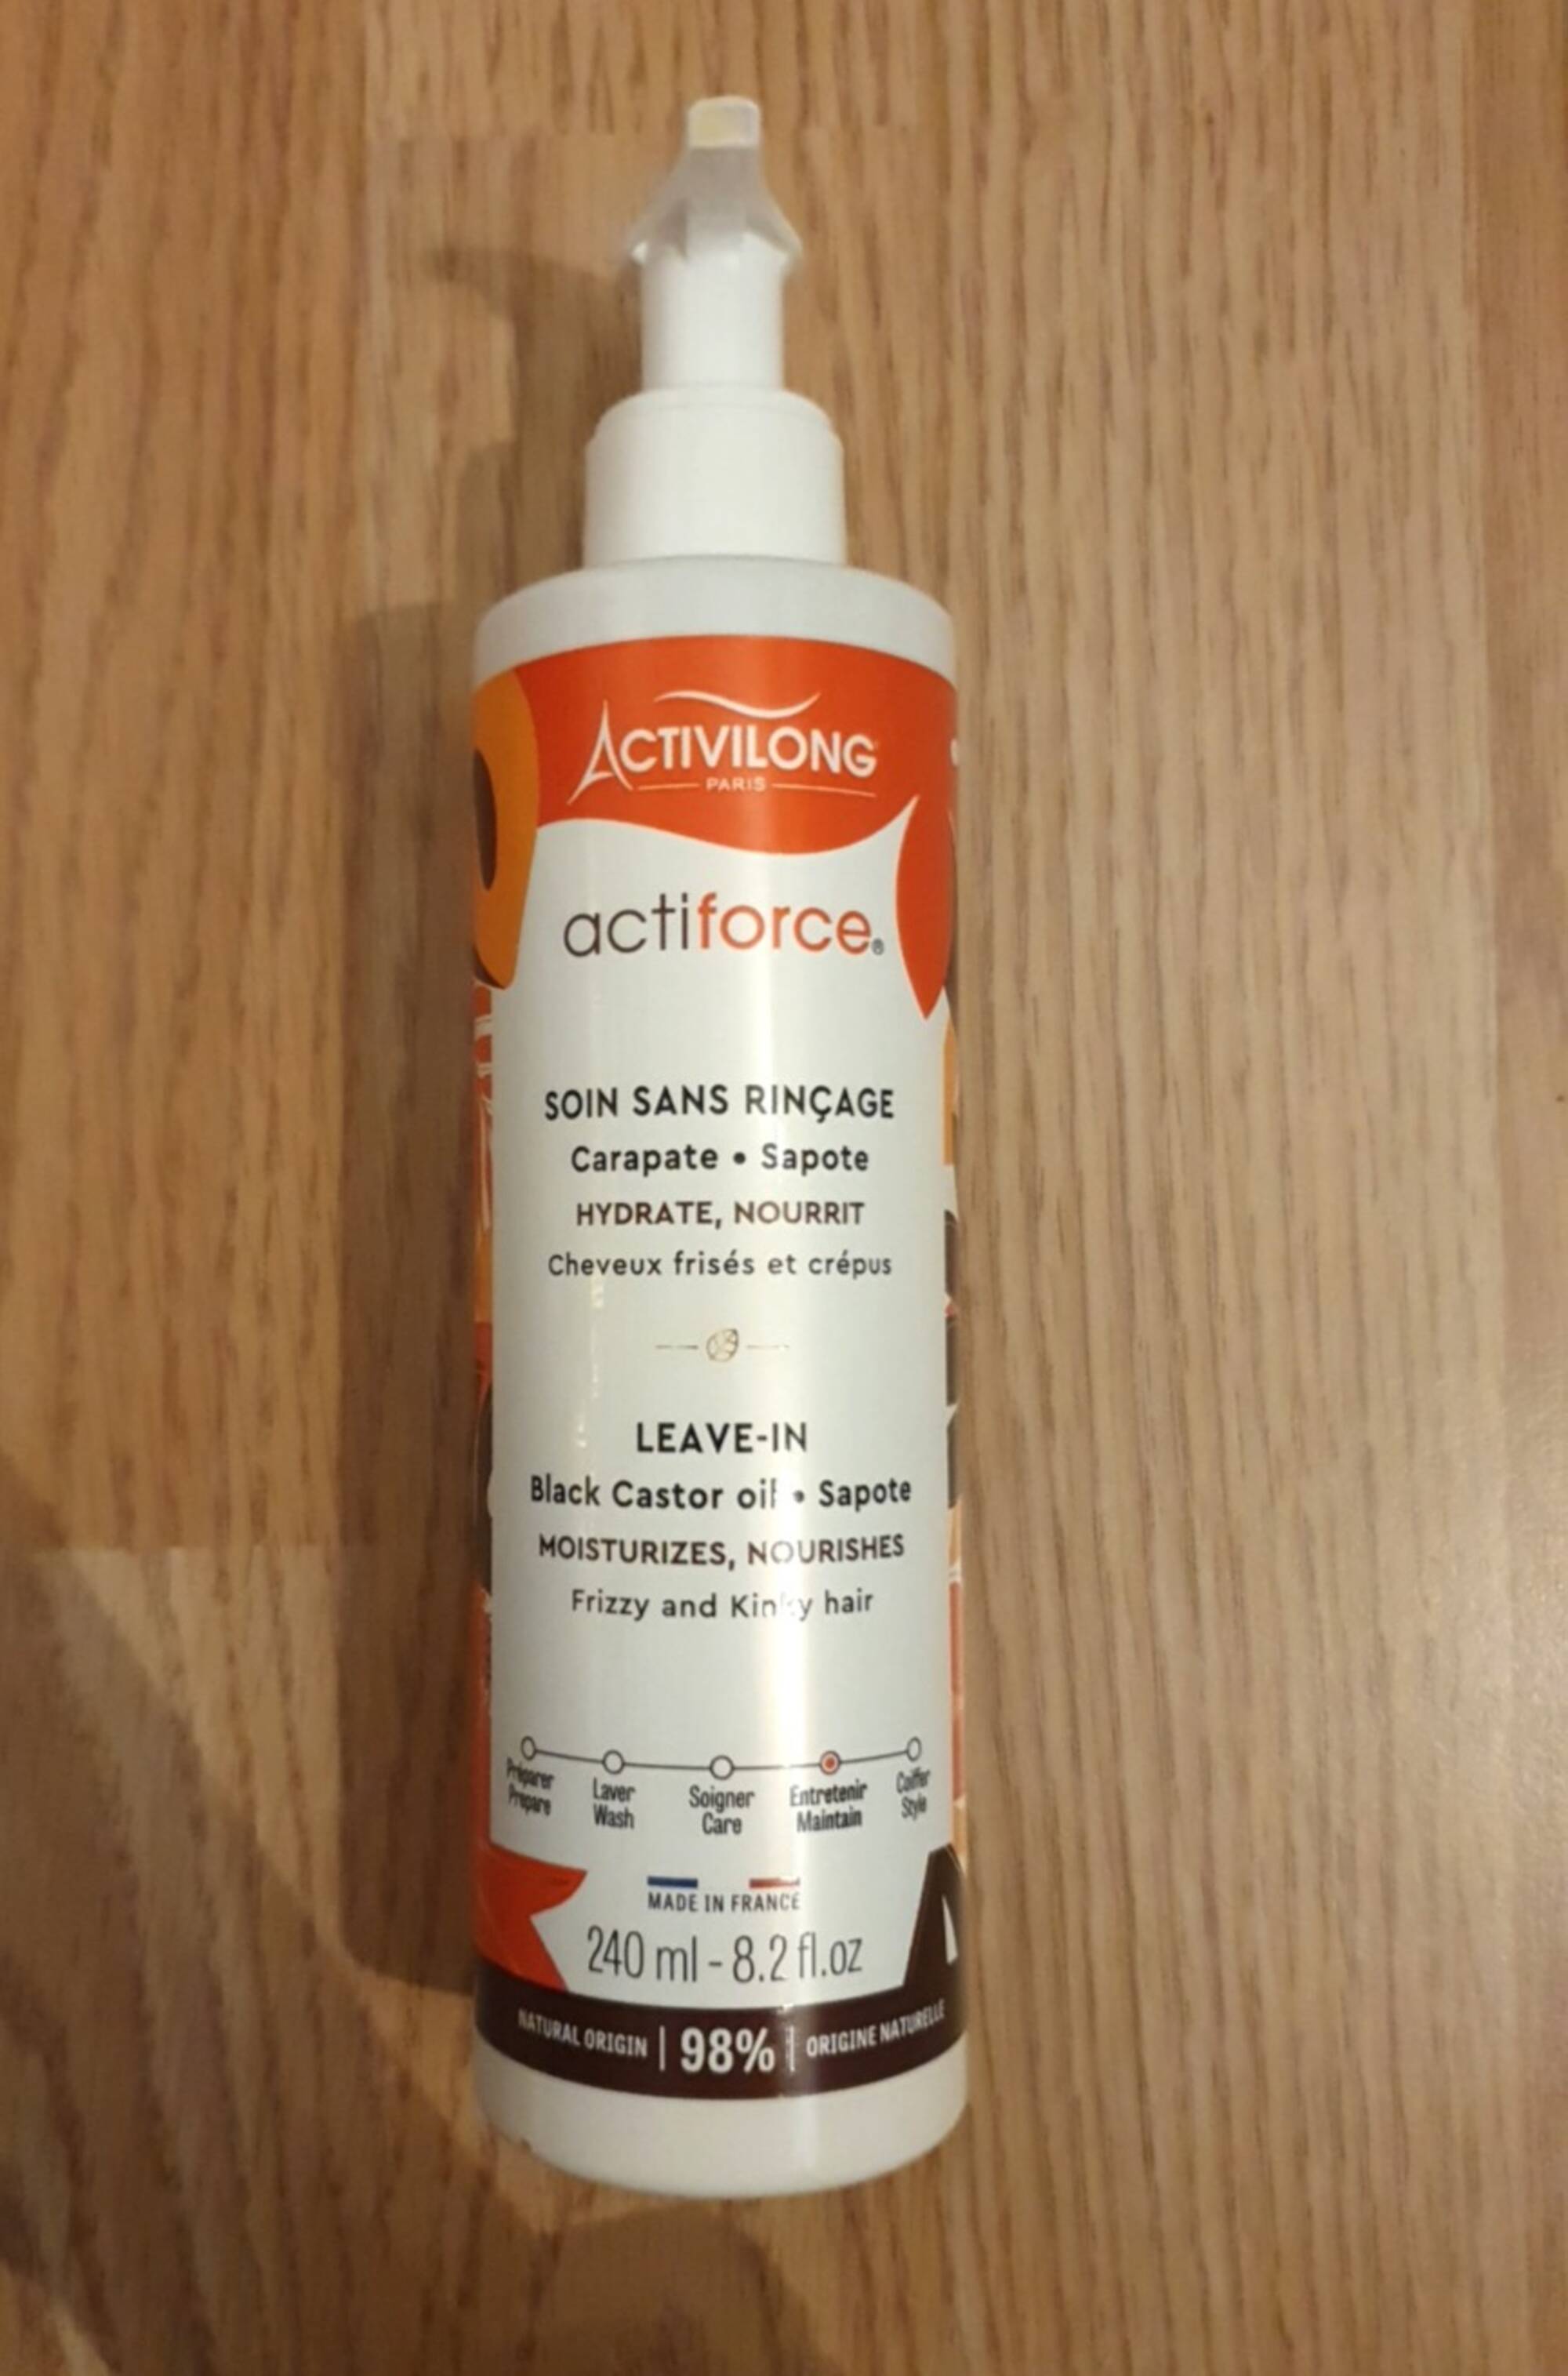 ACTIVILONG - Actiforce - Leave-in soins sans rinçage carapate sapote